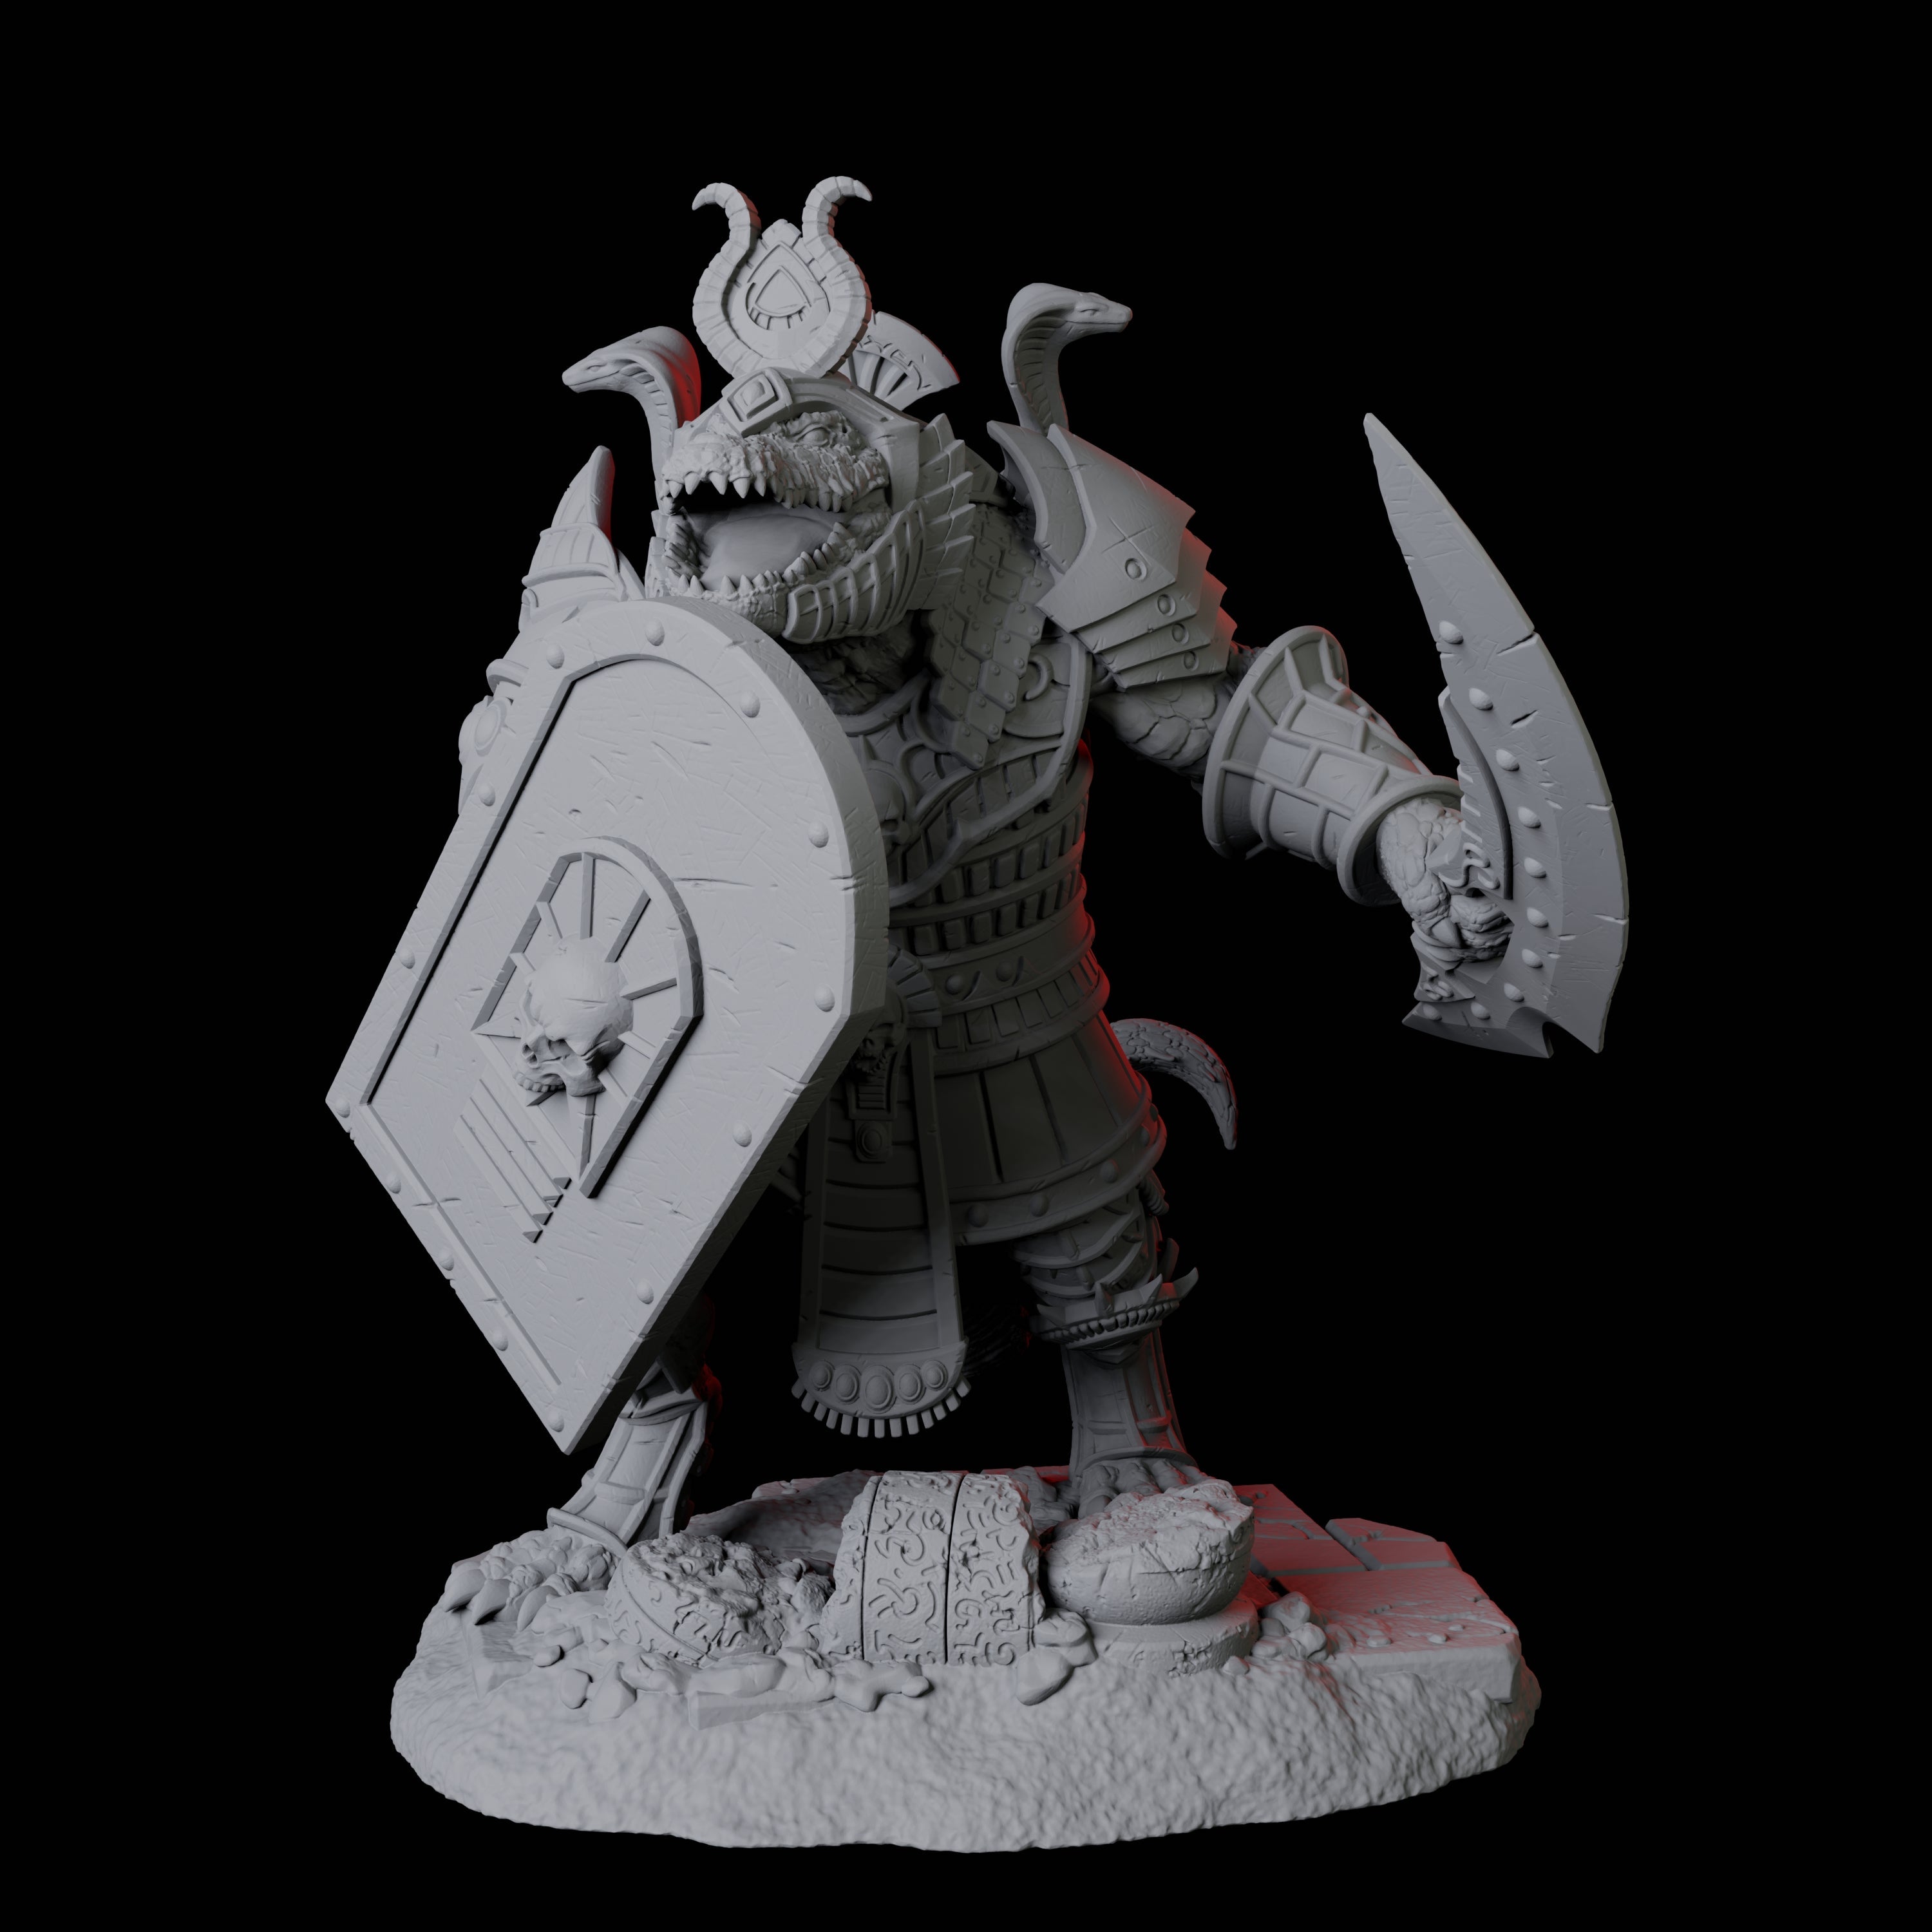 Charging Crocodile Lizardfolk Soldier B Miniature for Dungeons and Dragons, Pathfinder or other TTRPGs